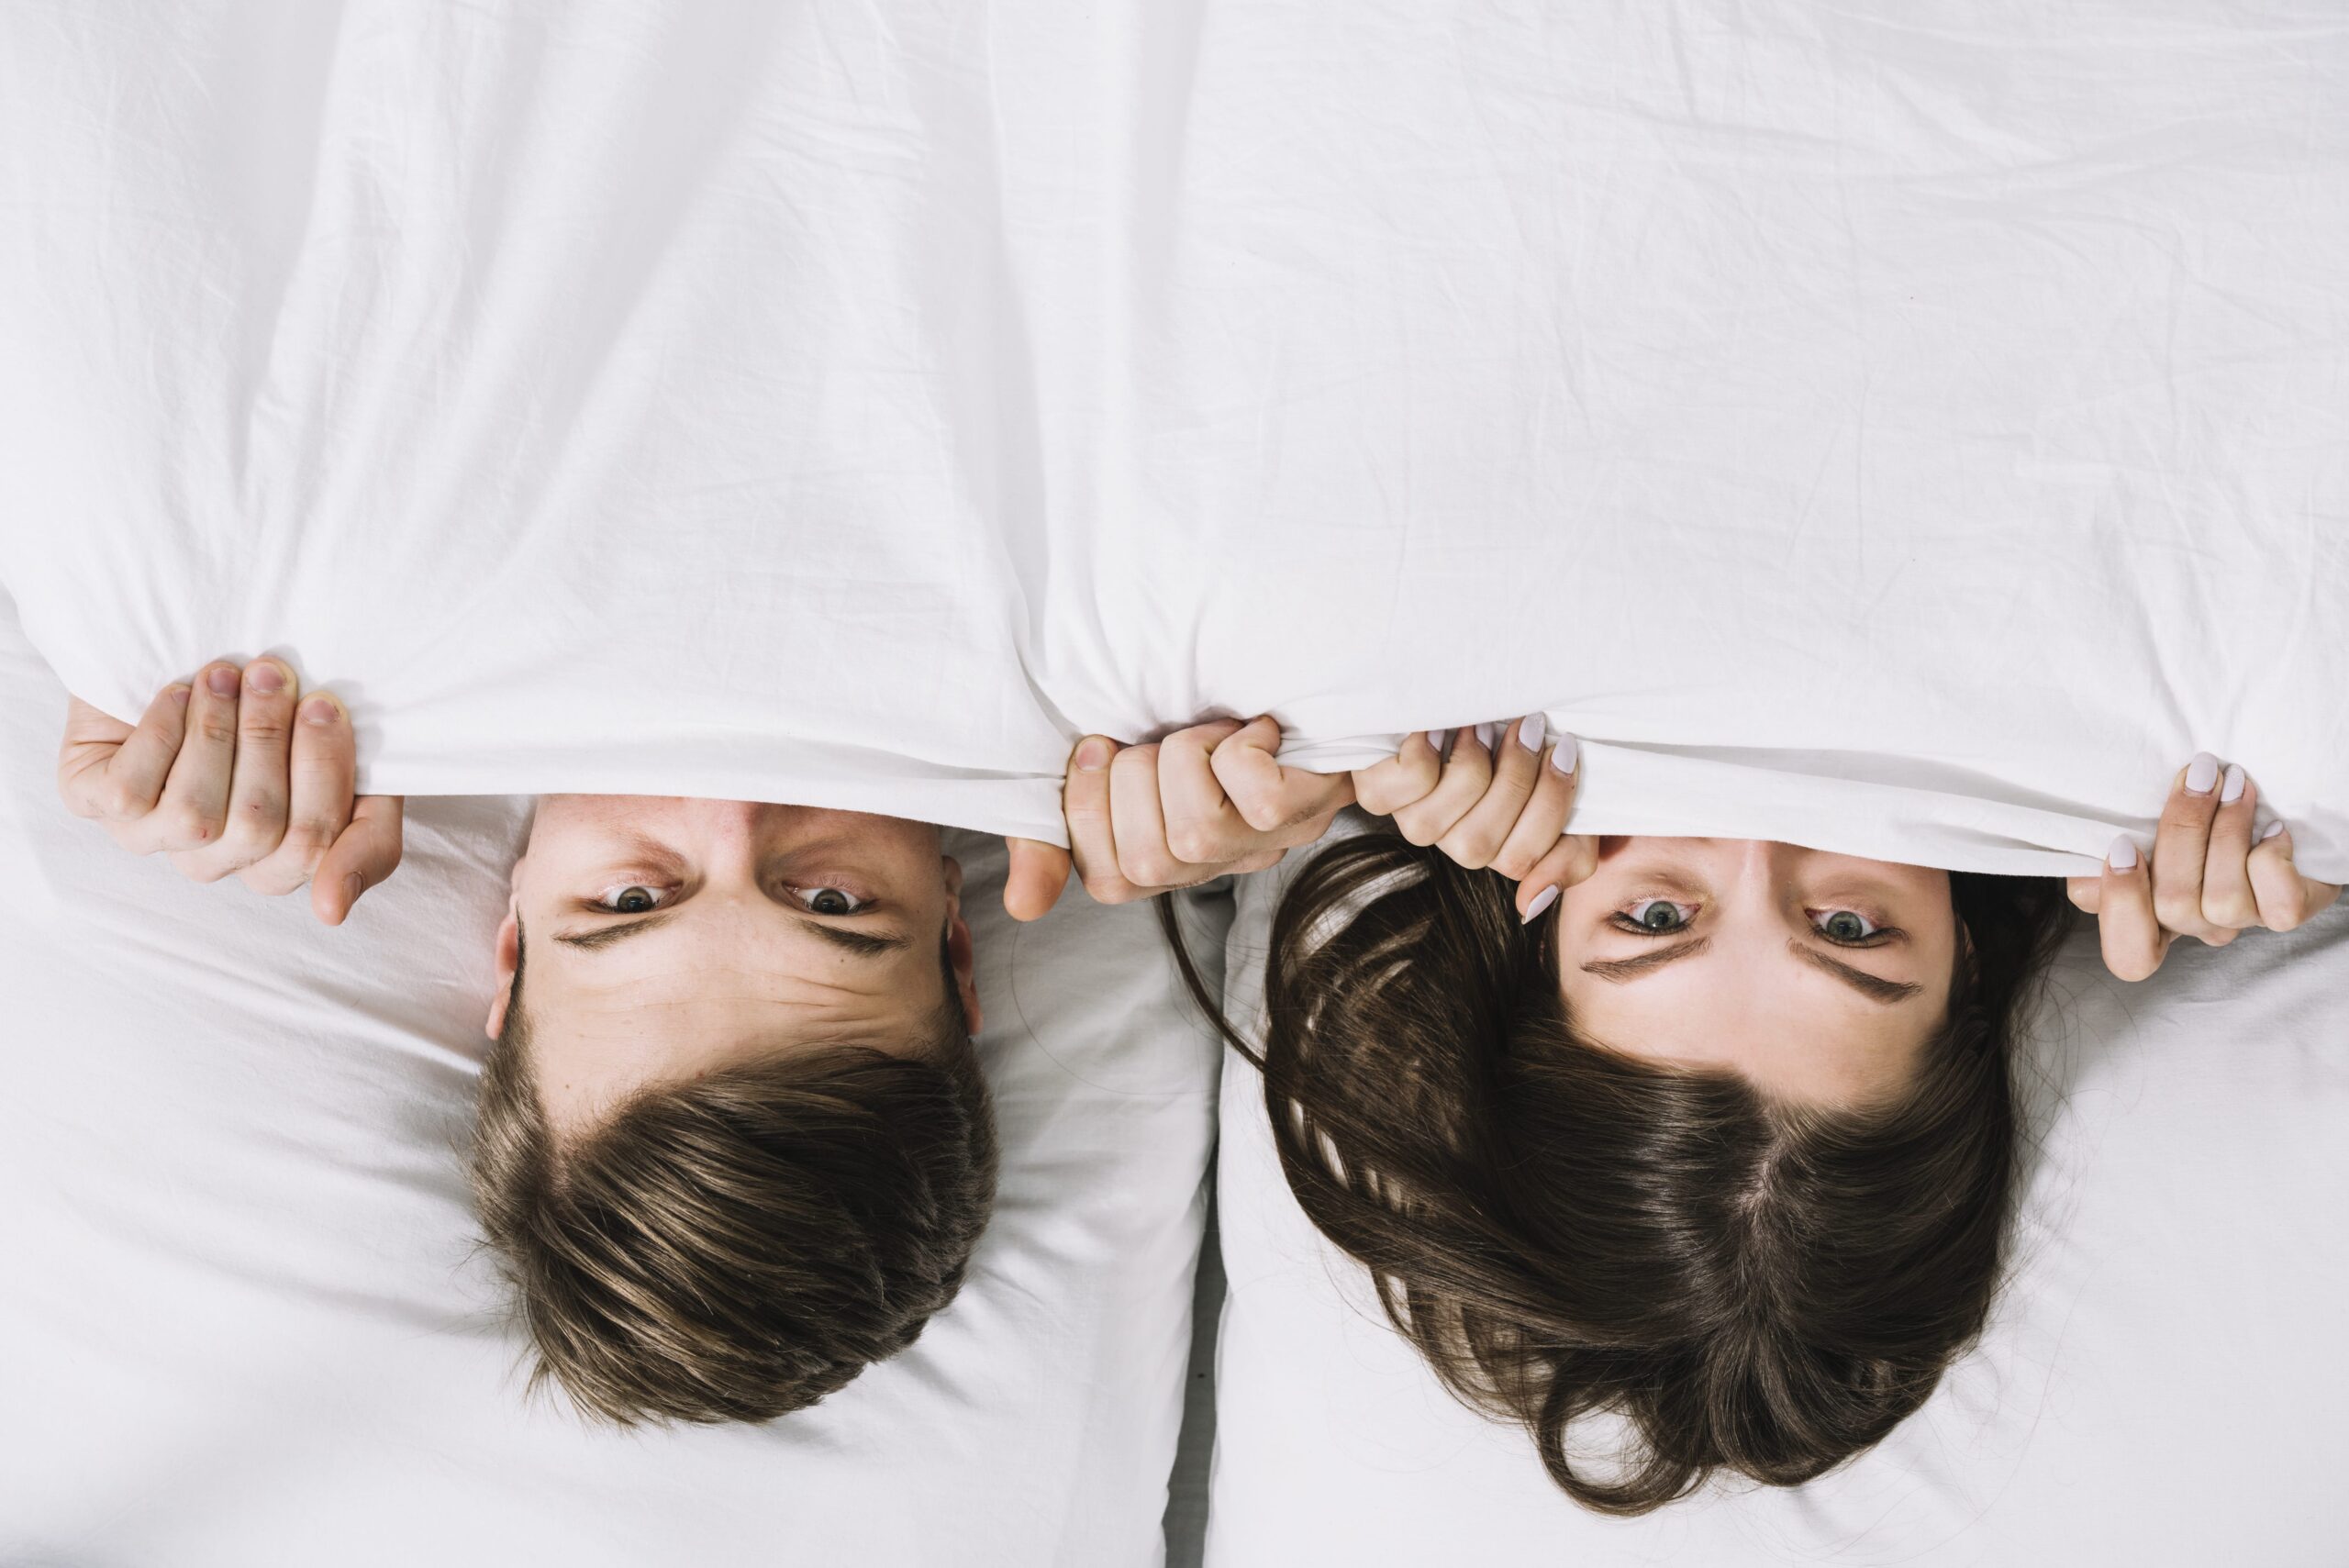 Best Zodiac Sign In Bed - These Zodiacs Signs Will Make You Want More In Bed